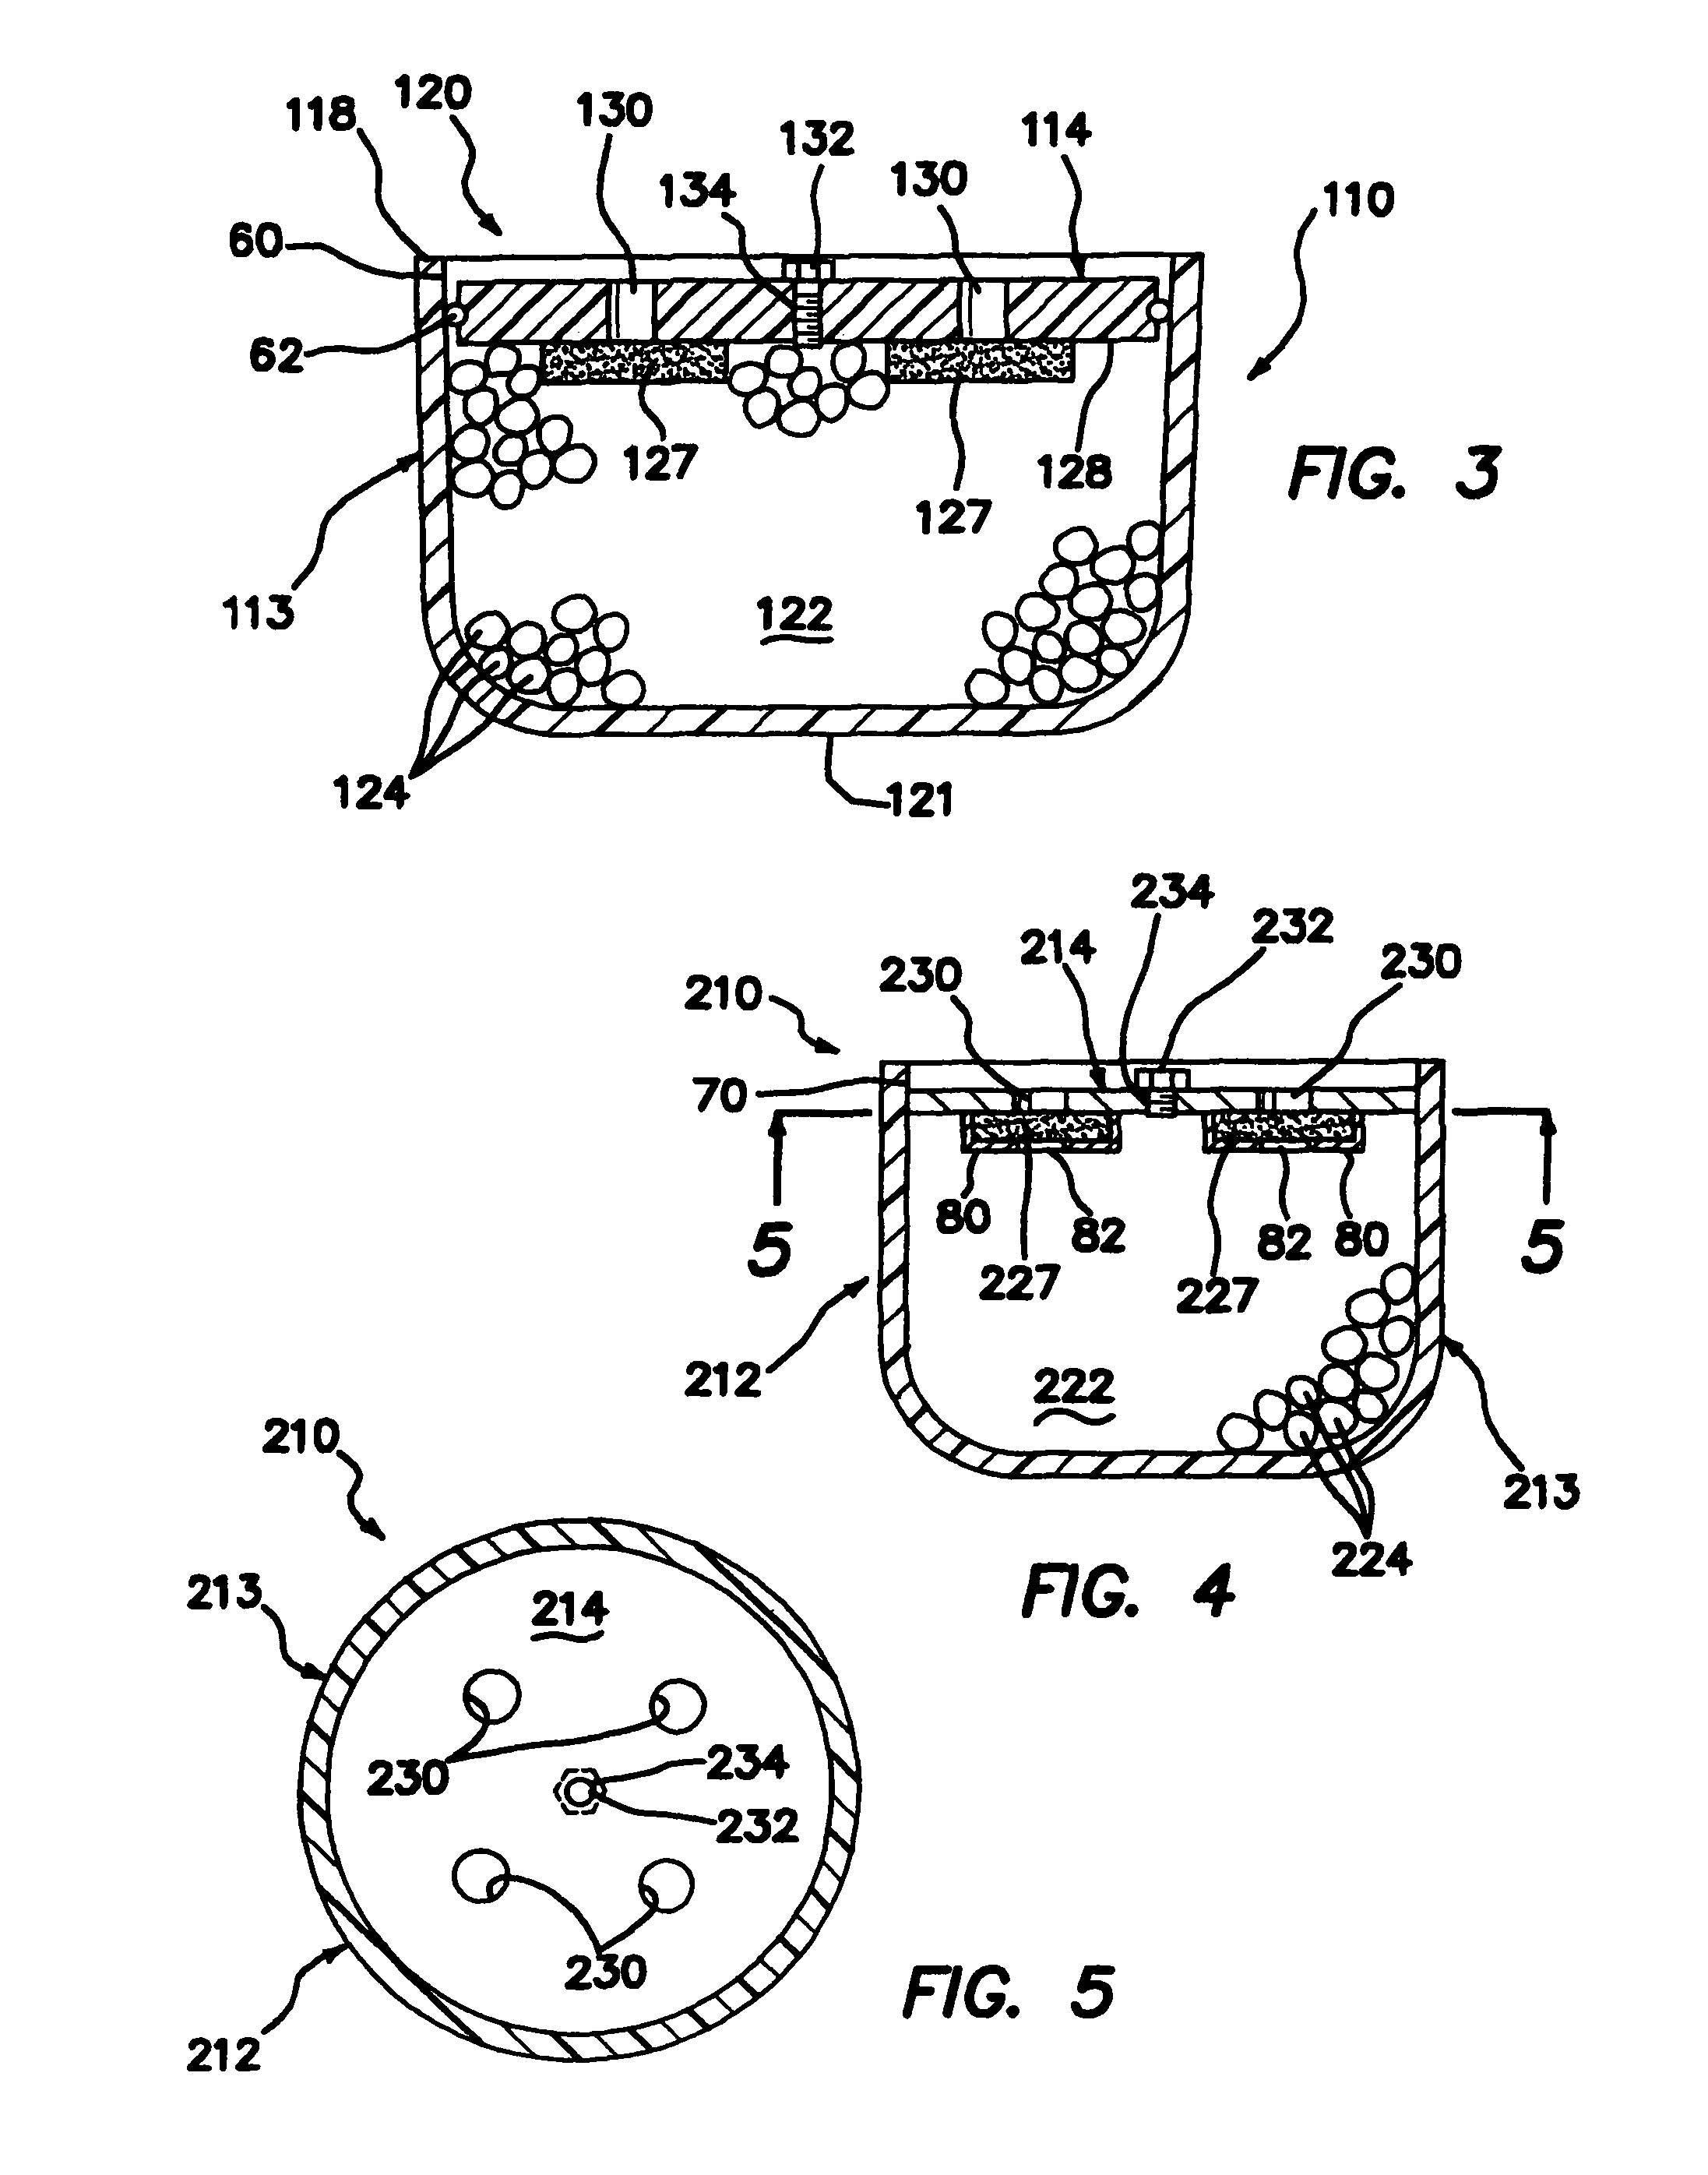 Devices and methods for controlled release of additive compositions